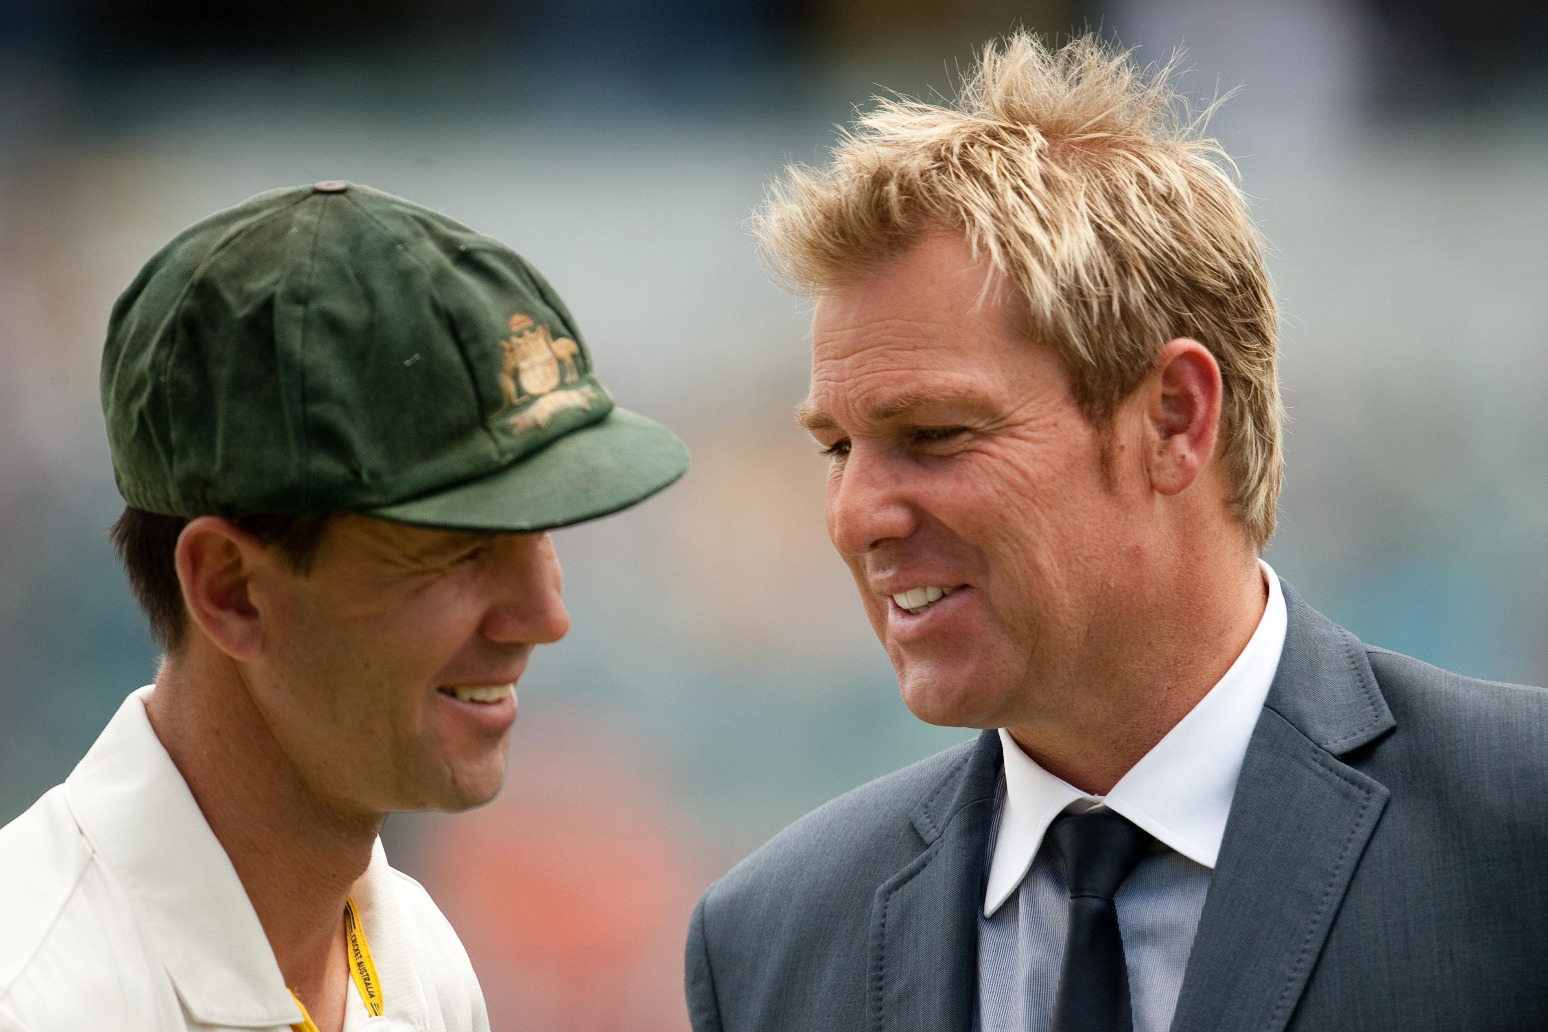 Shane Warne remembered as ‘much-loved cricketing legend’ at moving state funeral 